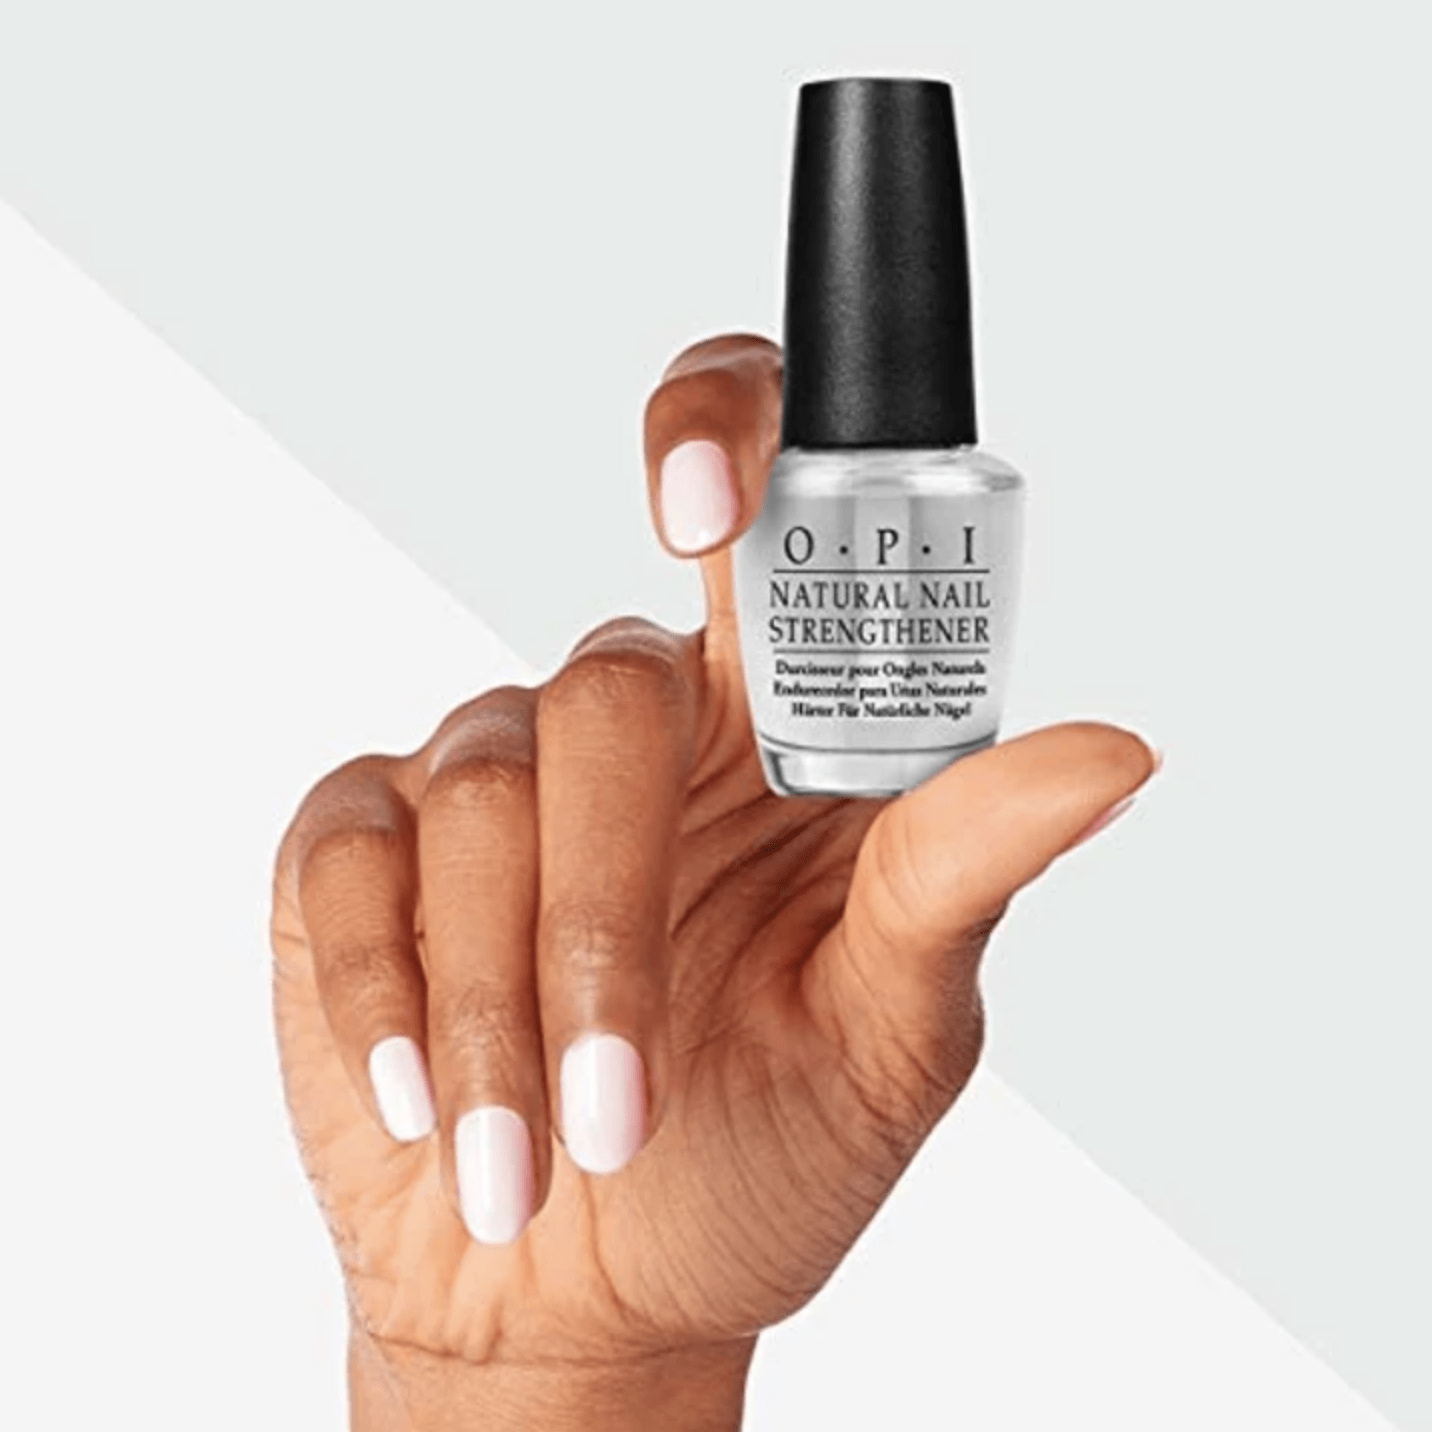 13 Best Nail Strengtheners For Damaged Nails In 2023, Per Reviews